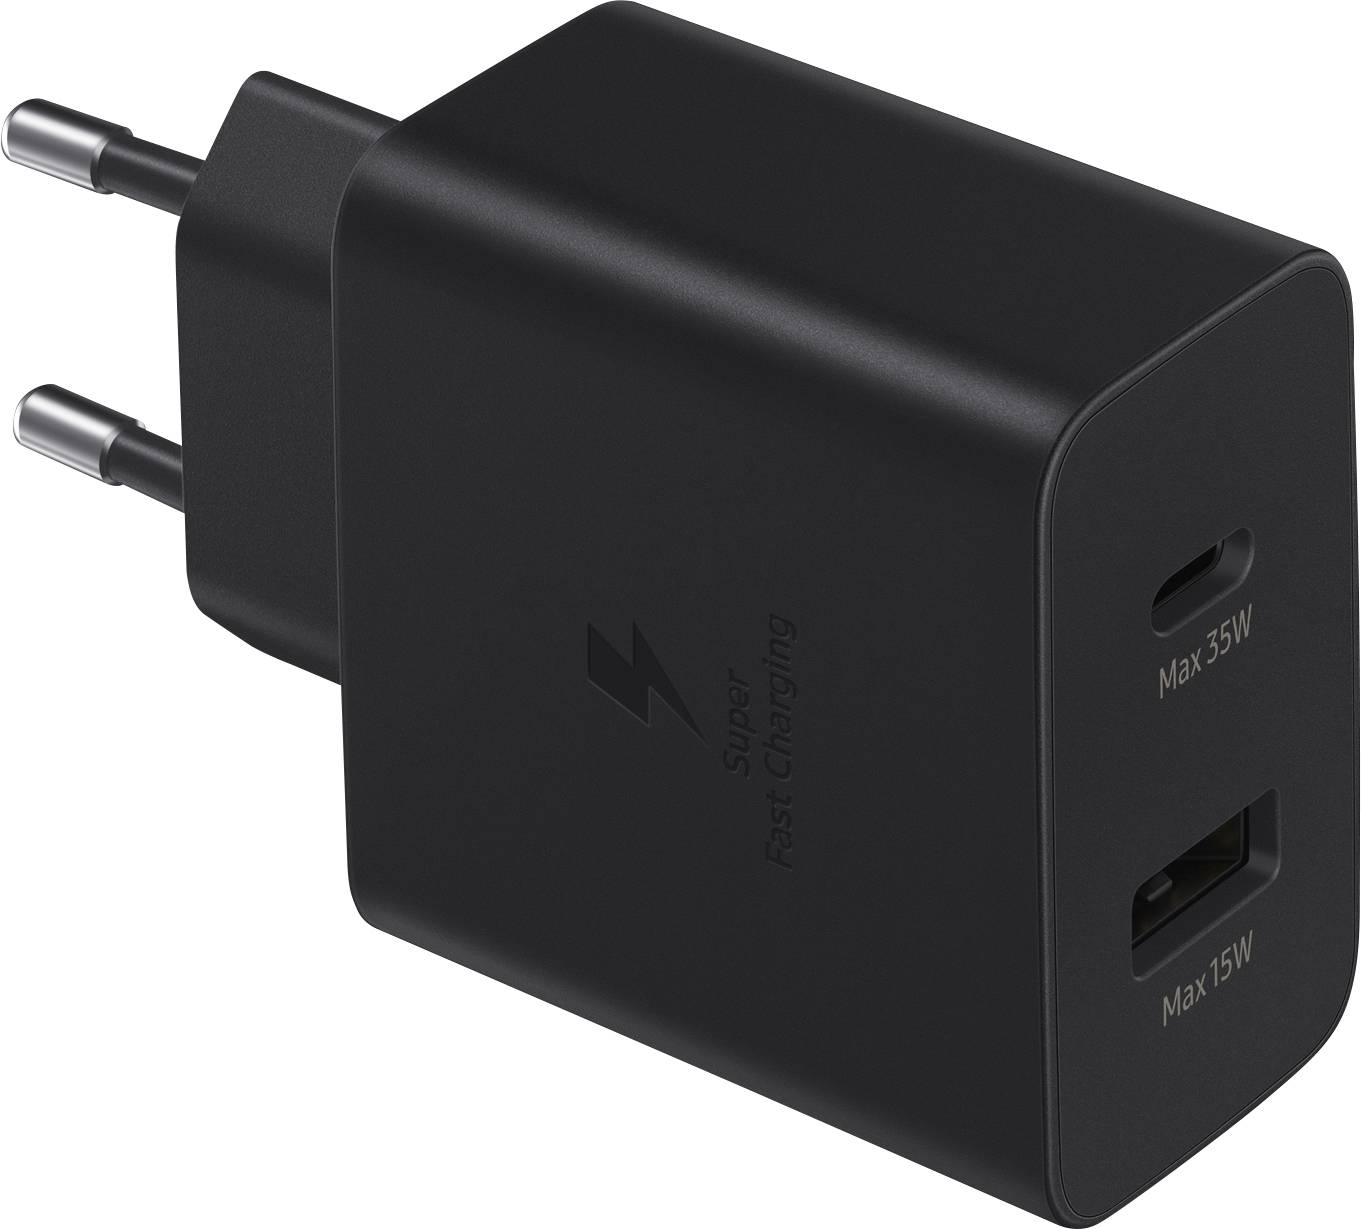 Samsung 30W Power Adapter Duo TA220N Mobile phone charger type + quick- charge mode USB-C®, USB Black | Conrad.com